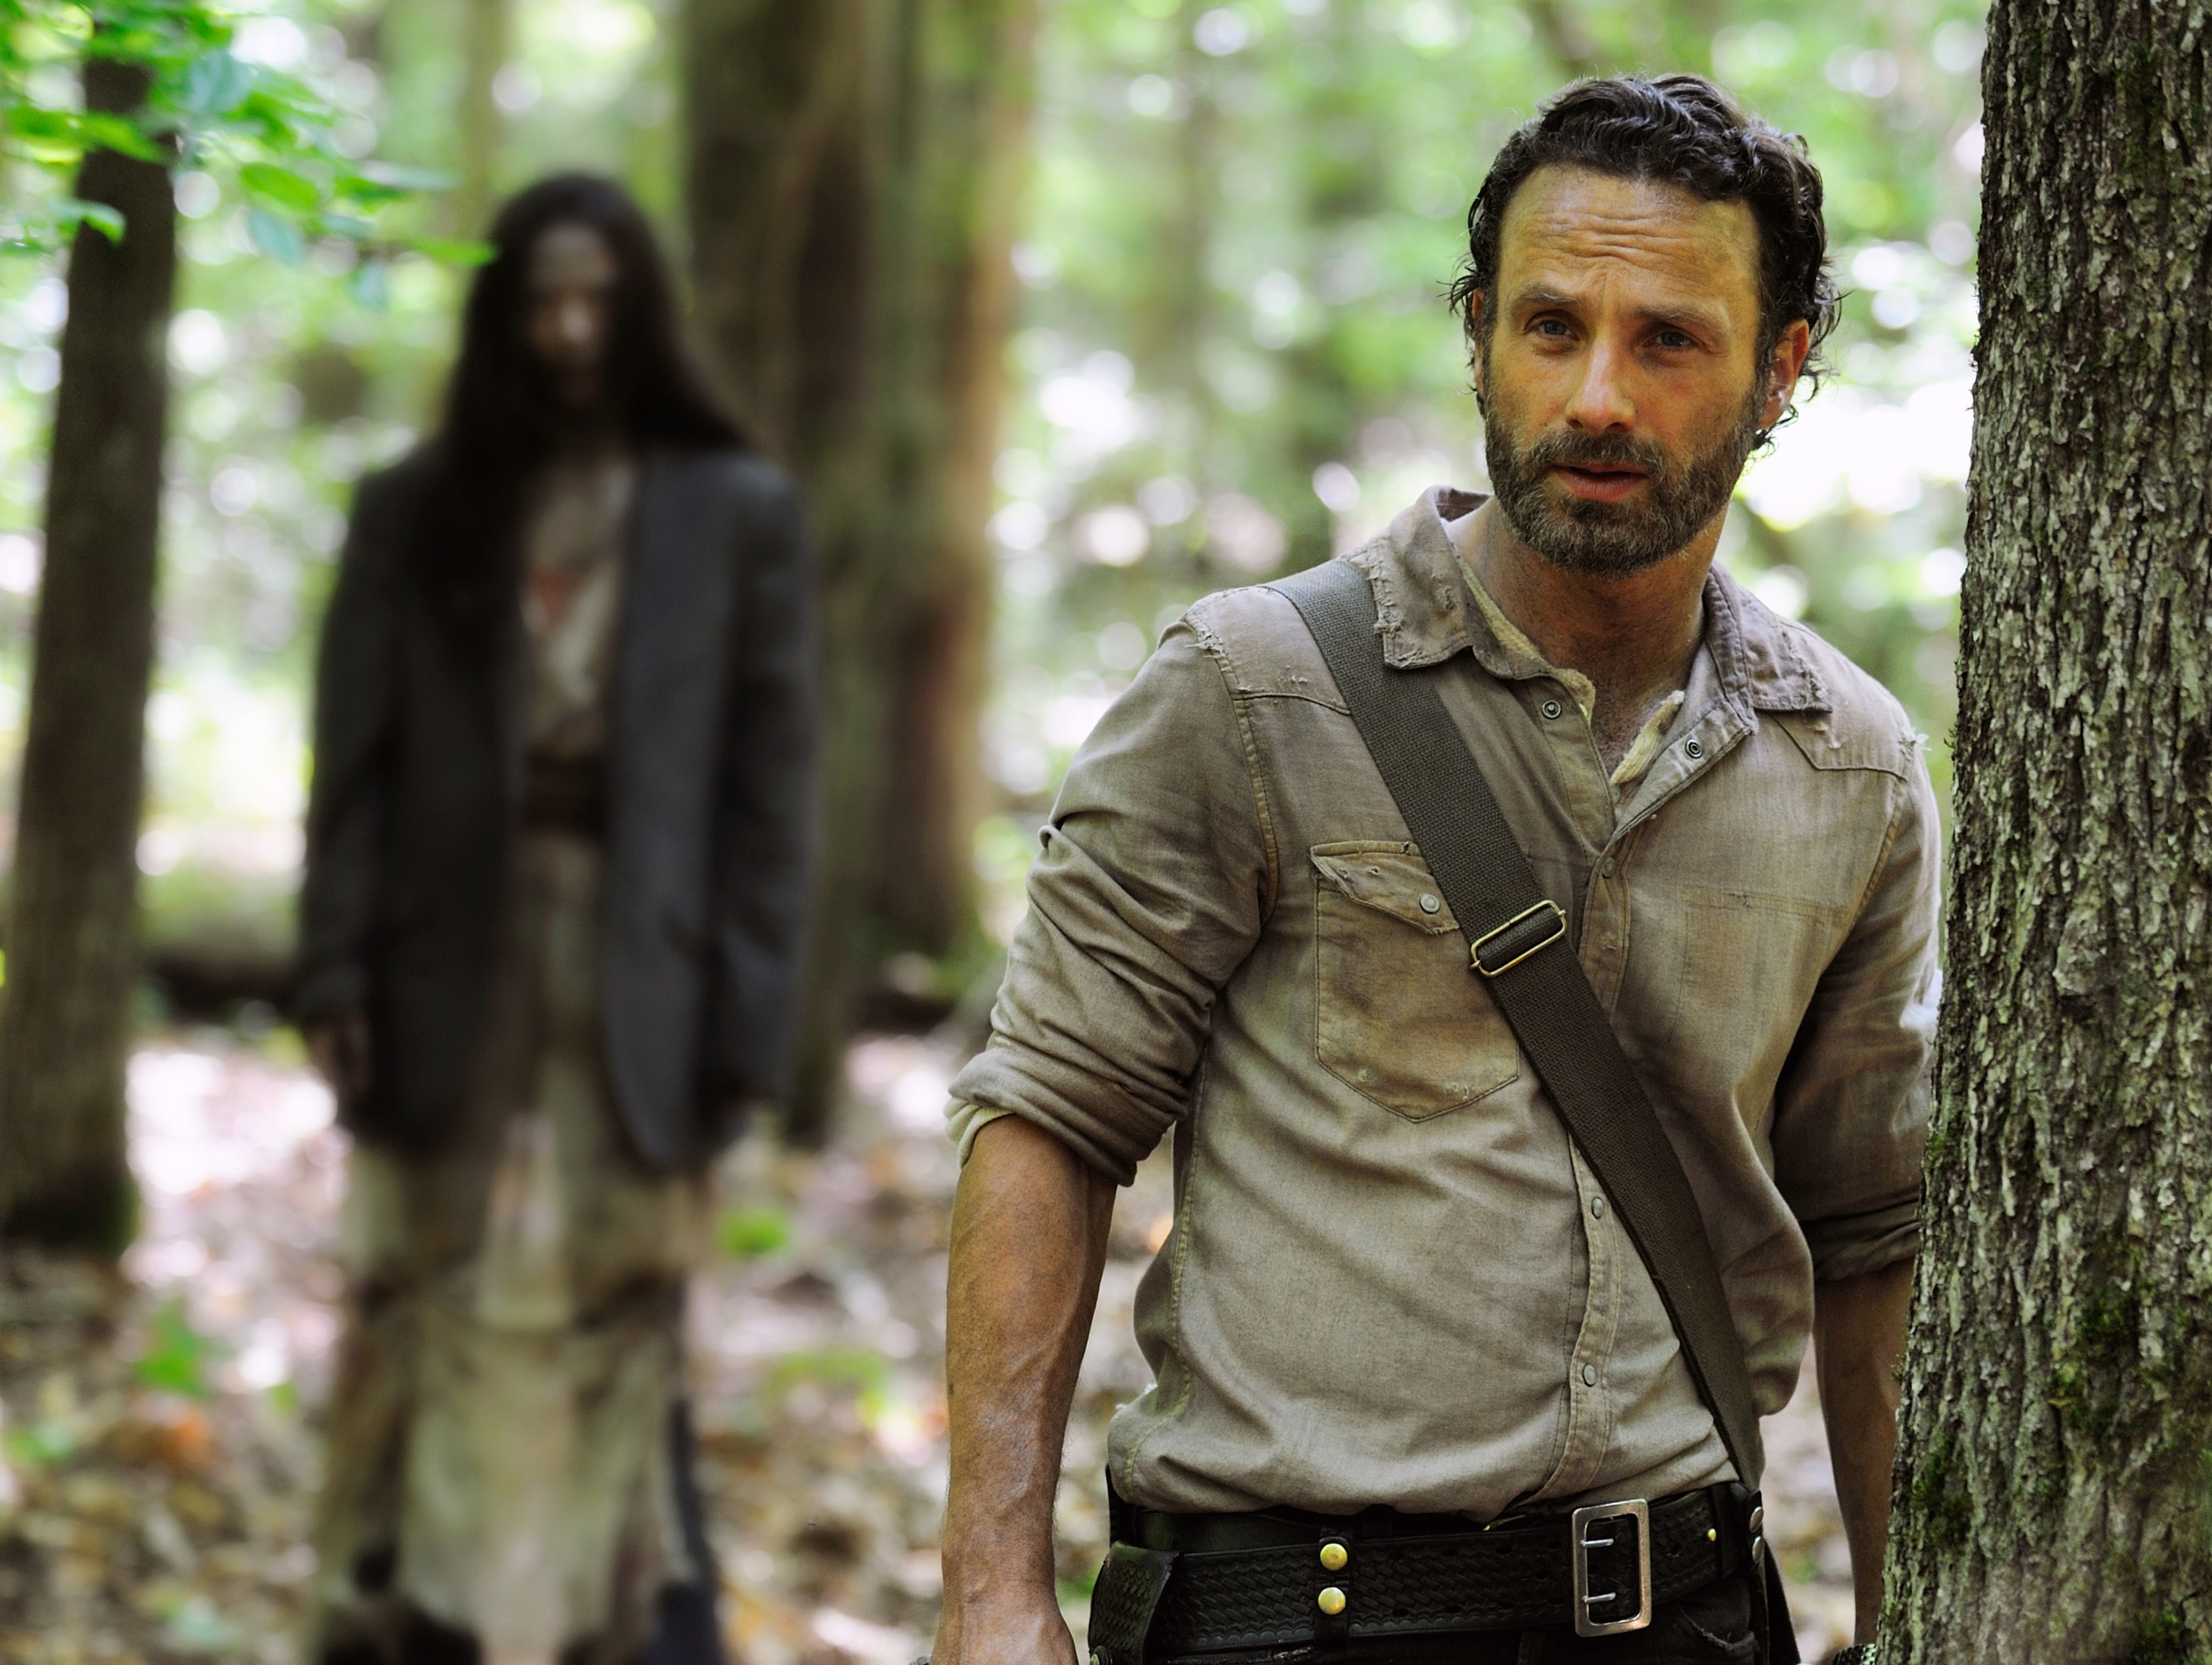 Andrew Lincoln as Rick Grimes in a scene from the season four premiere of "The Walking Dead."